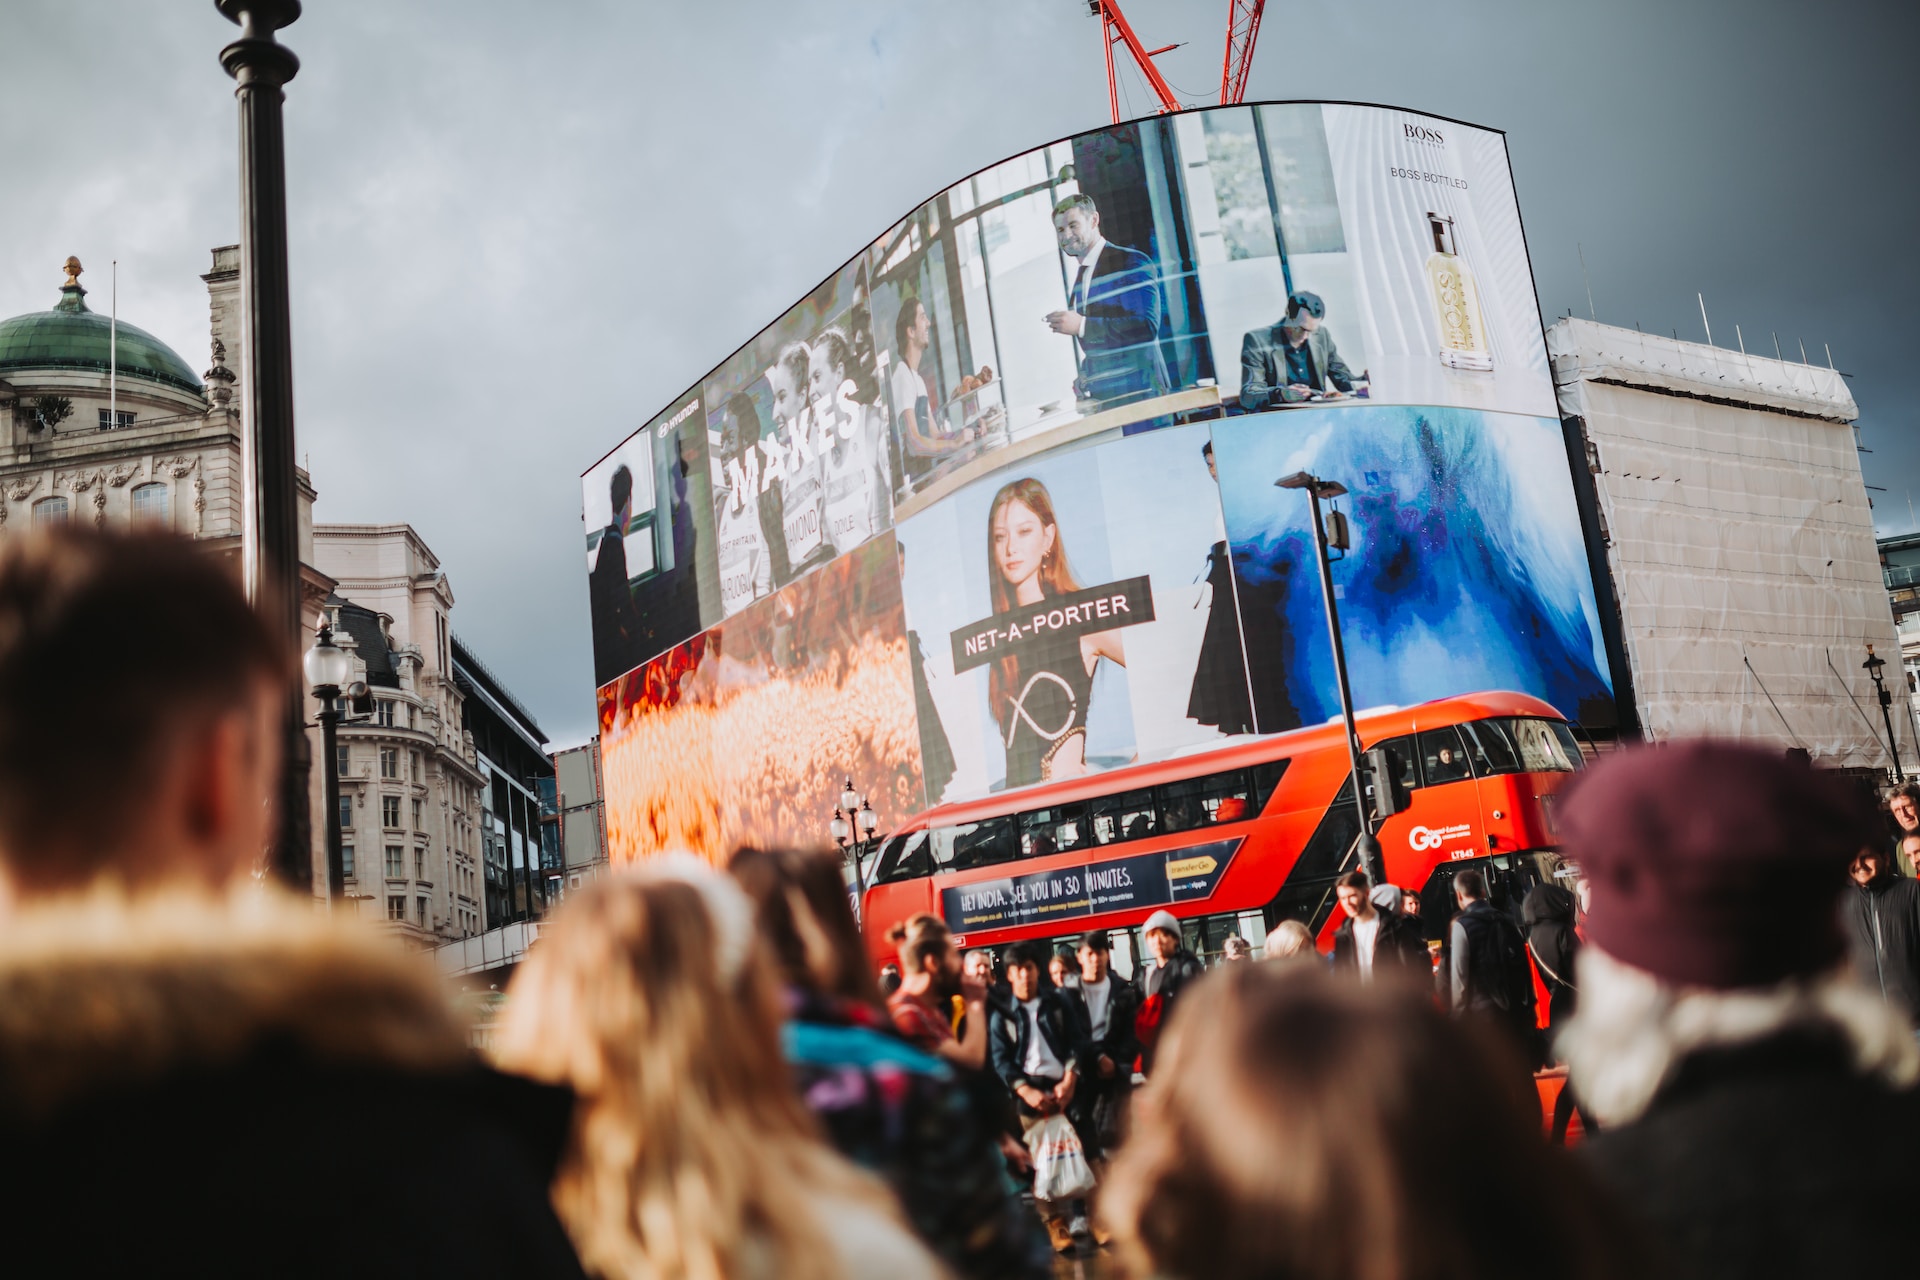 Samsung takes over Piccadilly Circus with landmark live streamed gaming event